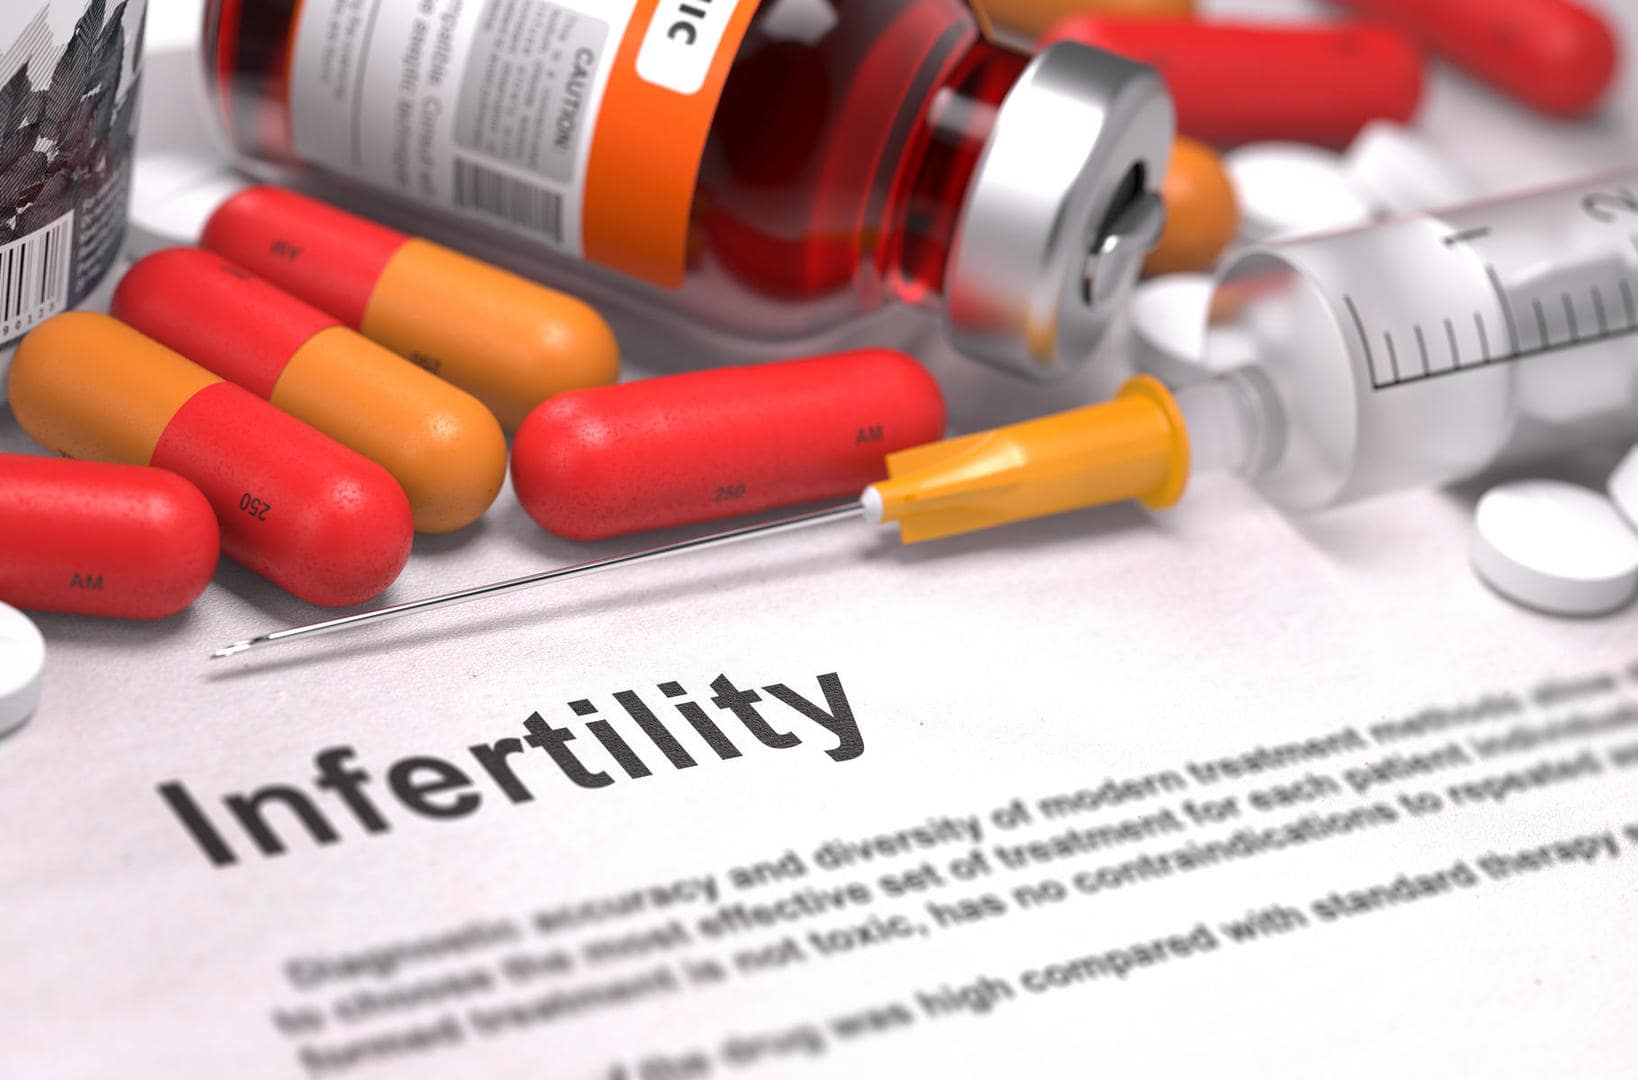 Global Infertility Treatment Market Projected to Reach USD 28,059.4 Mn by the end of 2025 | Growing at a CAGR of 9.4% during 2018-2025